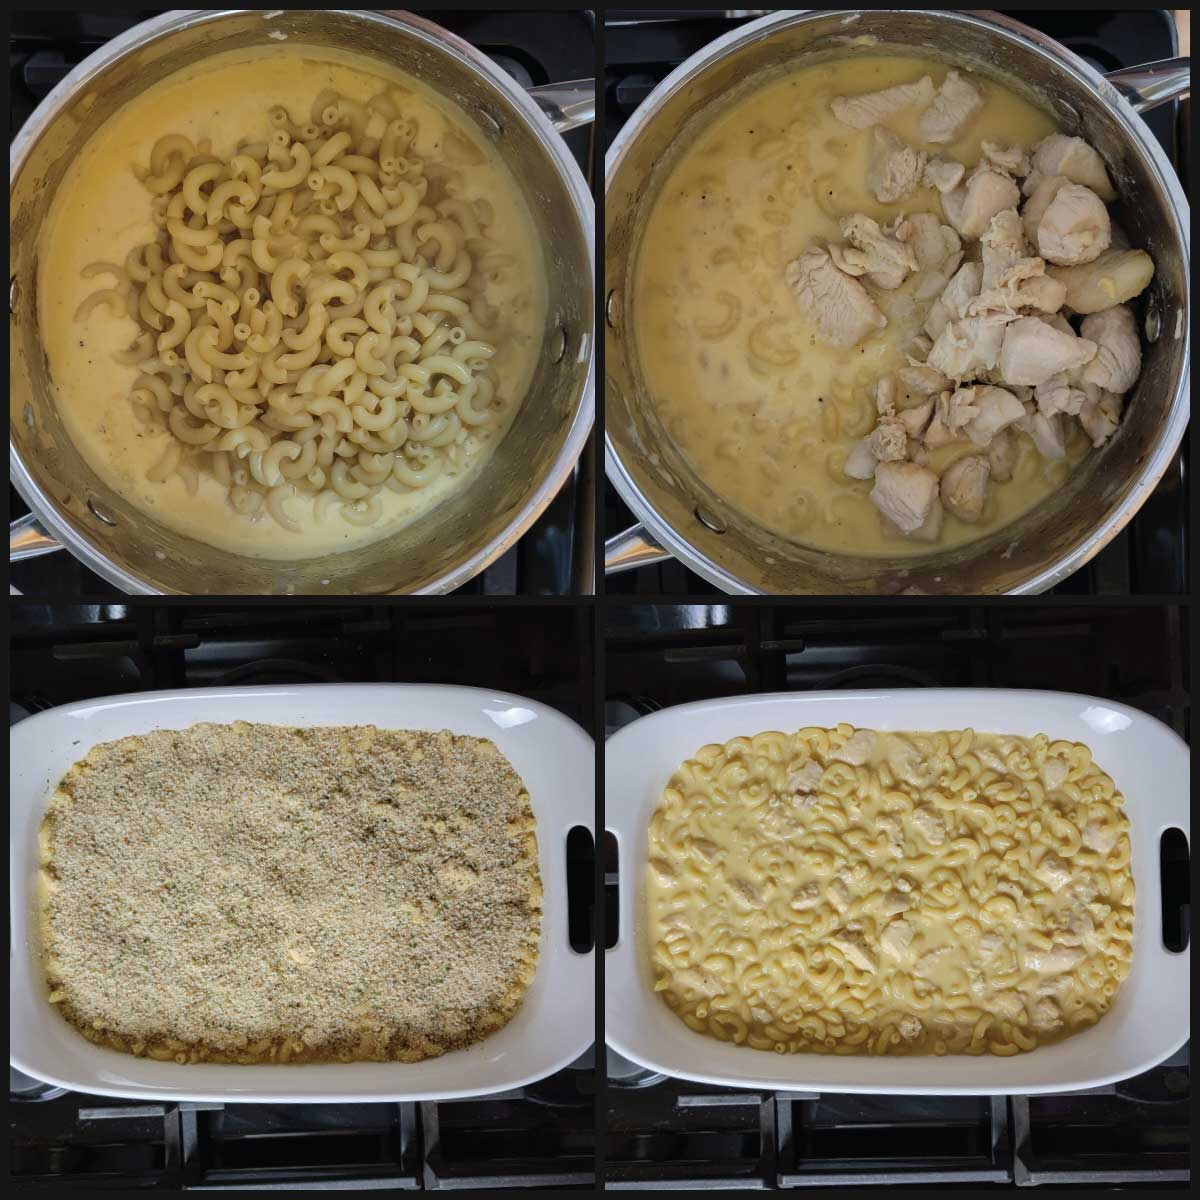 Steps for assembling the casserole - adding the pasta to the sauce, adding in the chicken, pouring in dish, adding breadcrumbs.